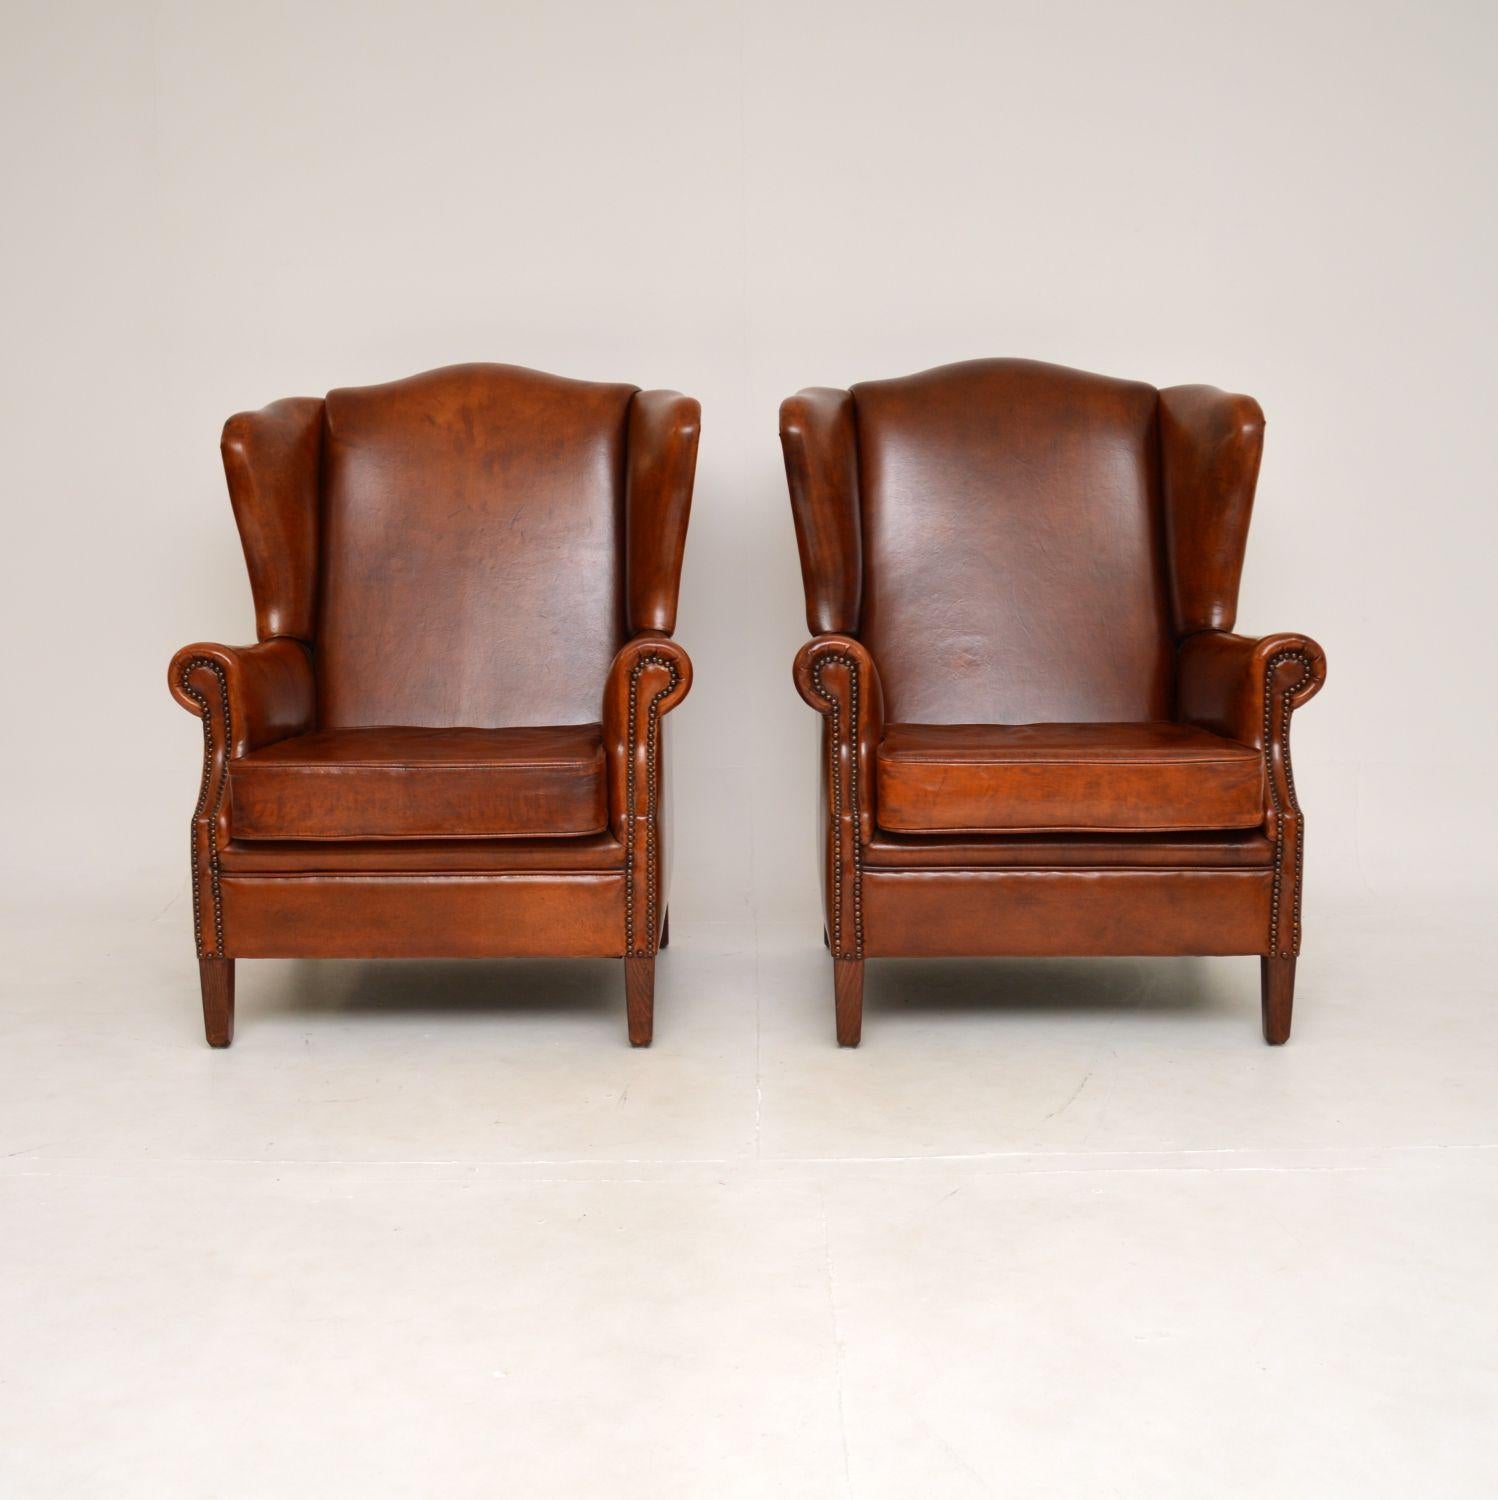 Georgian Pair of Antique Leather Wing Back Armchairs